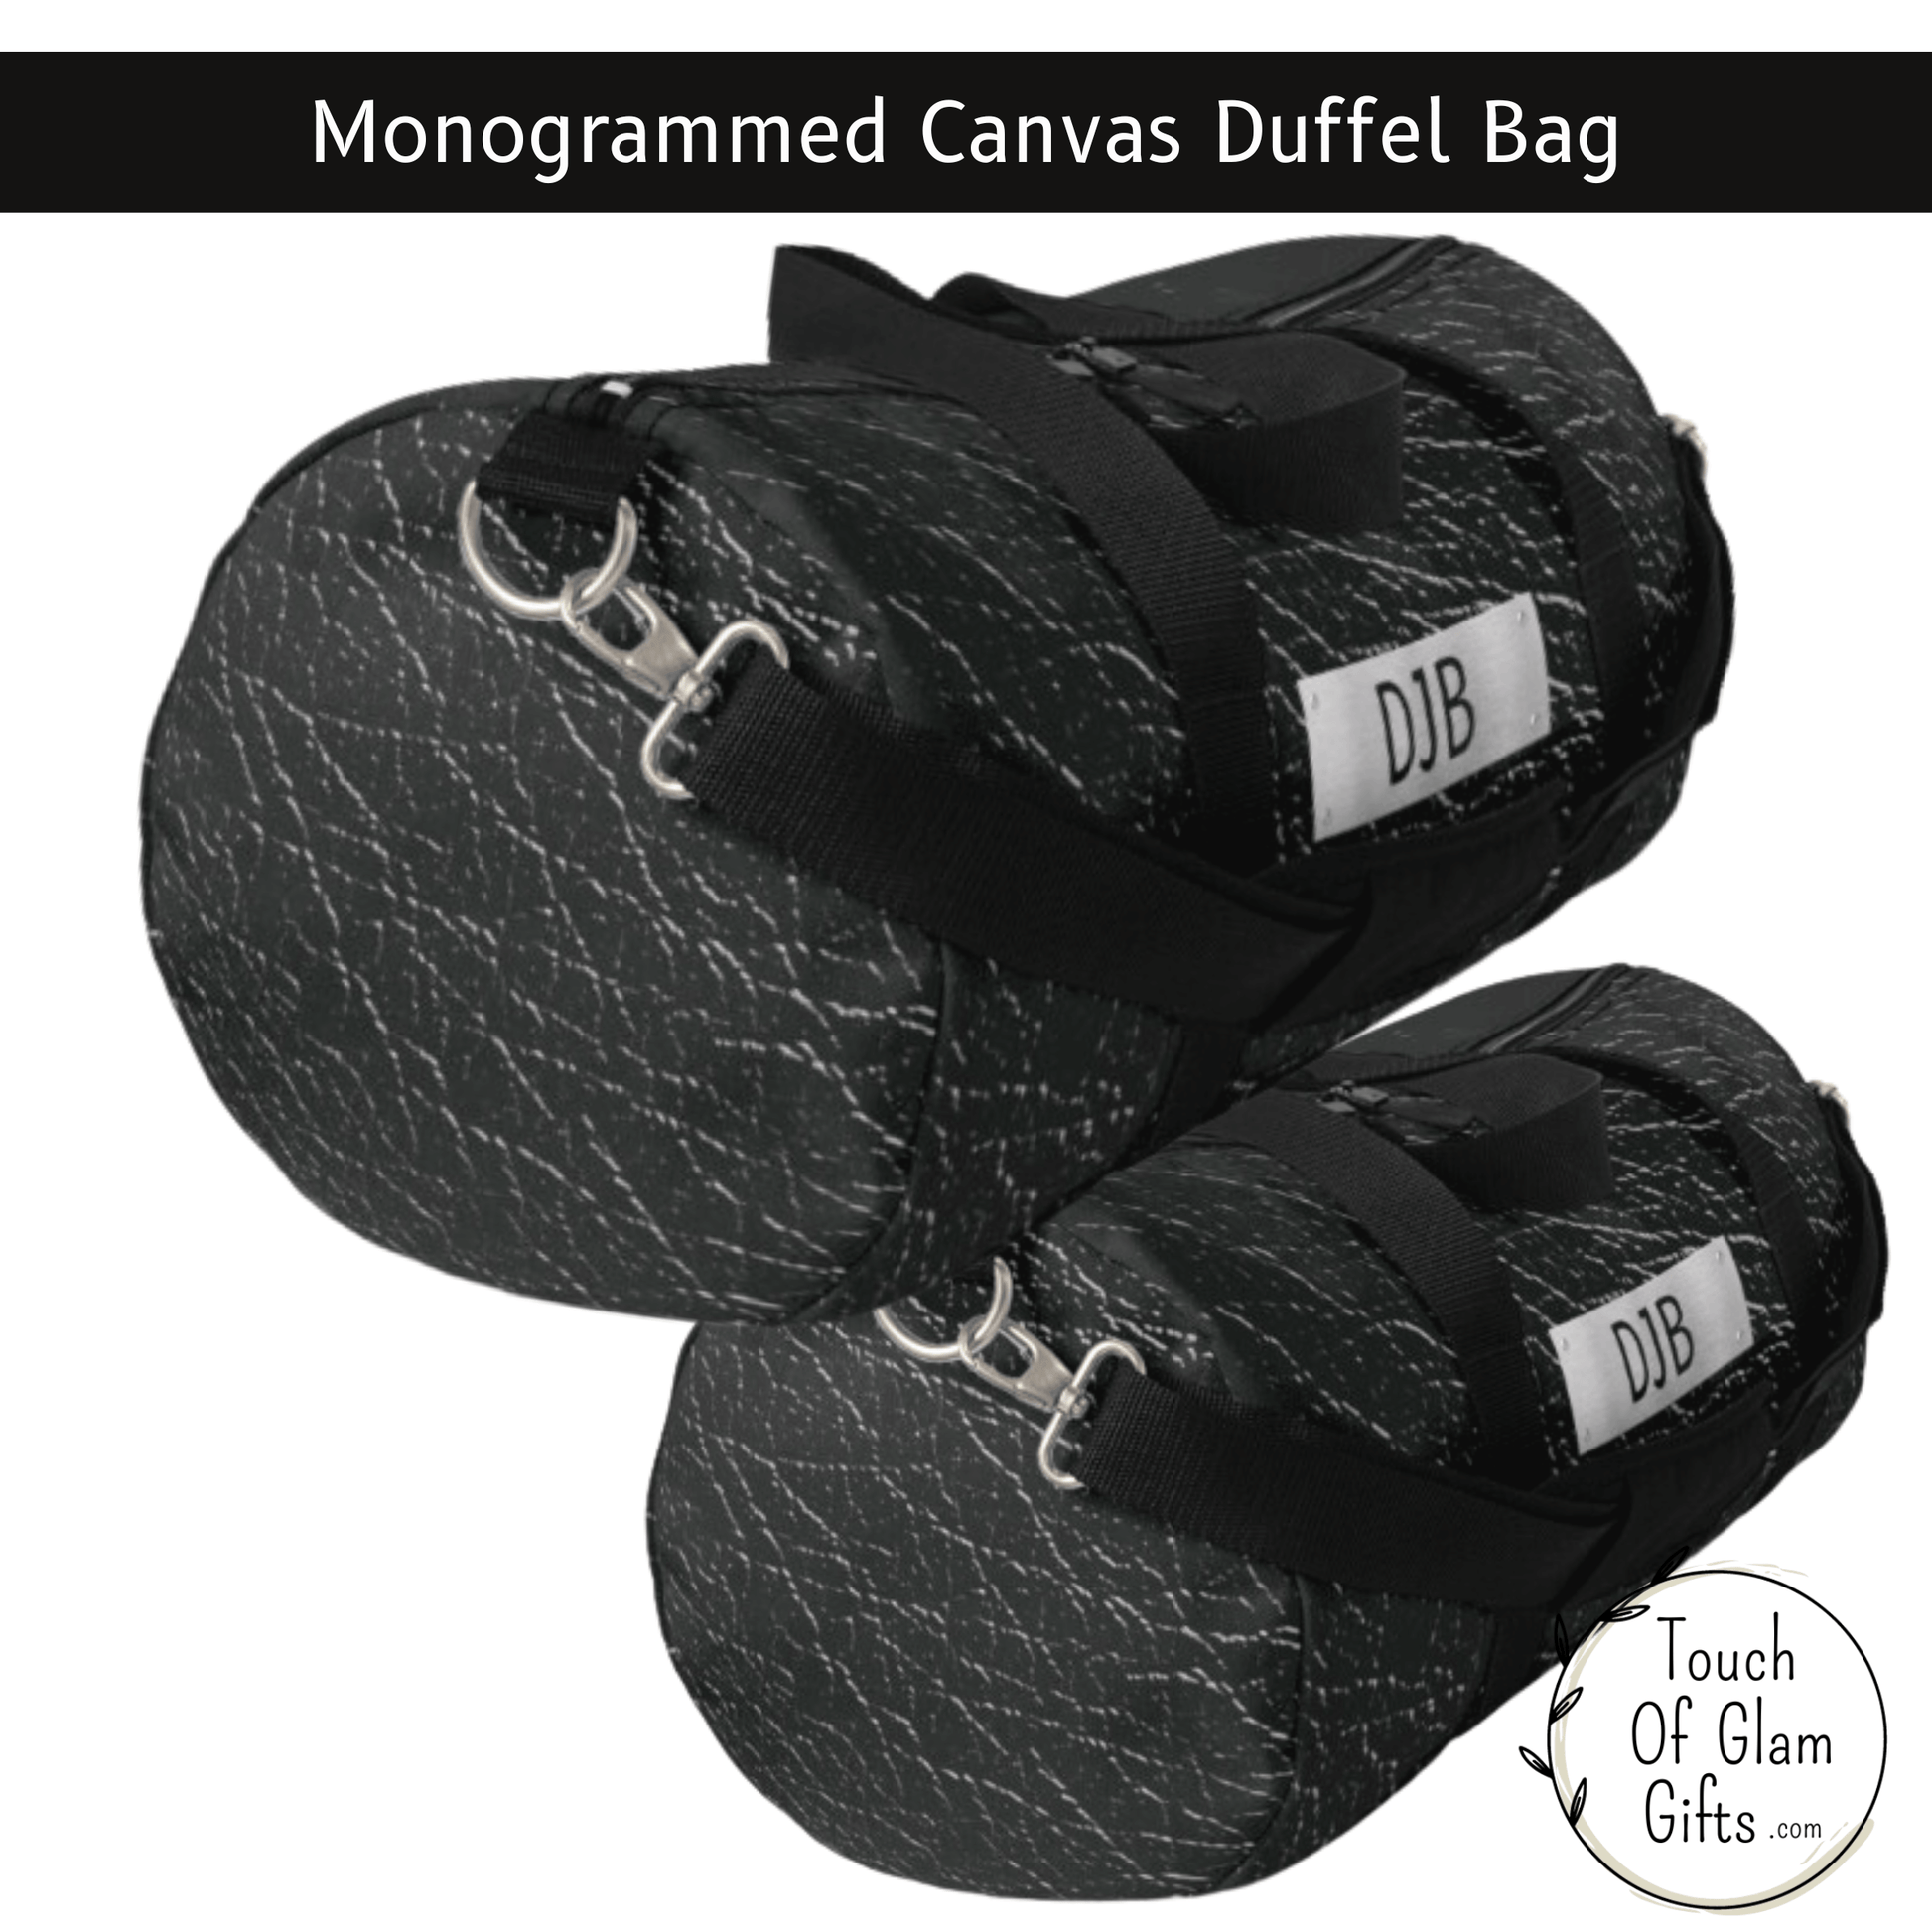 Mens monogram initials personalized dark grey and black duffel bag has a steel print with black initials. This durable canvas duffel bag has a dark gray leather print on canvas.